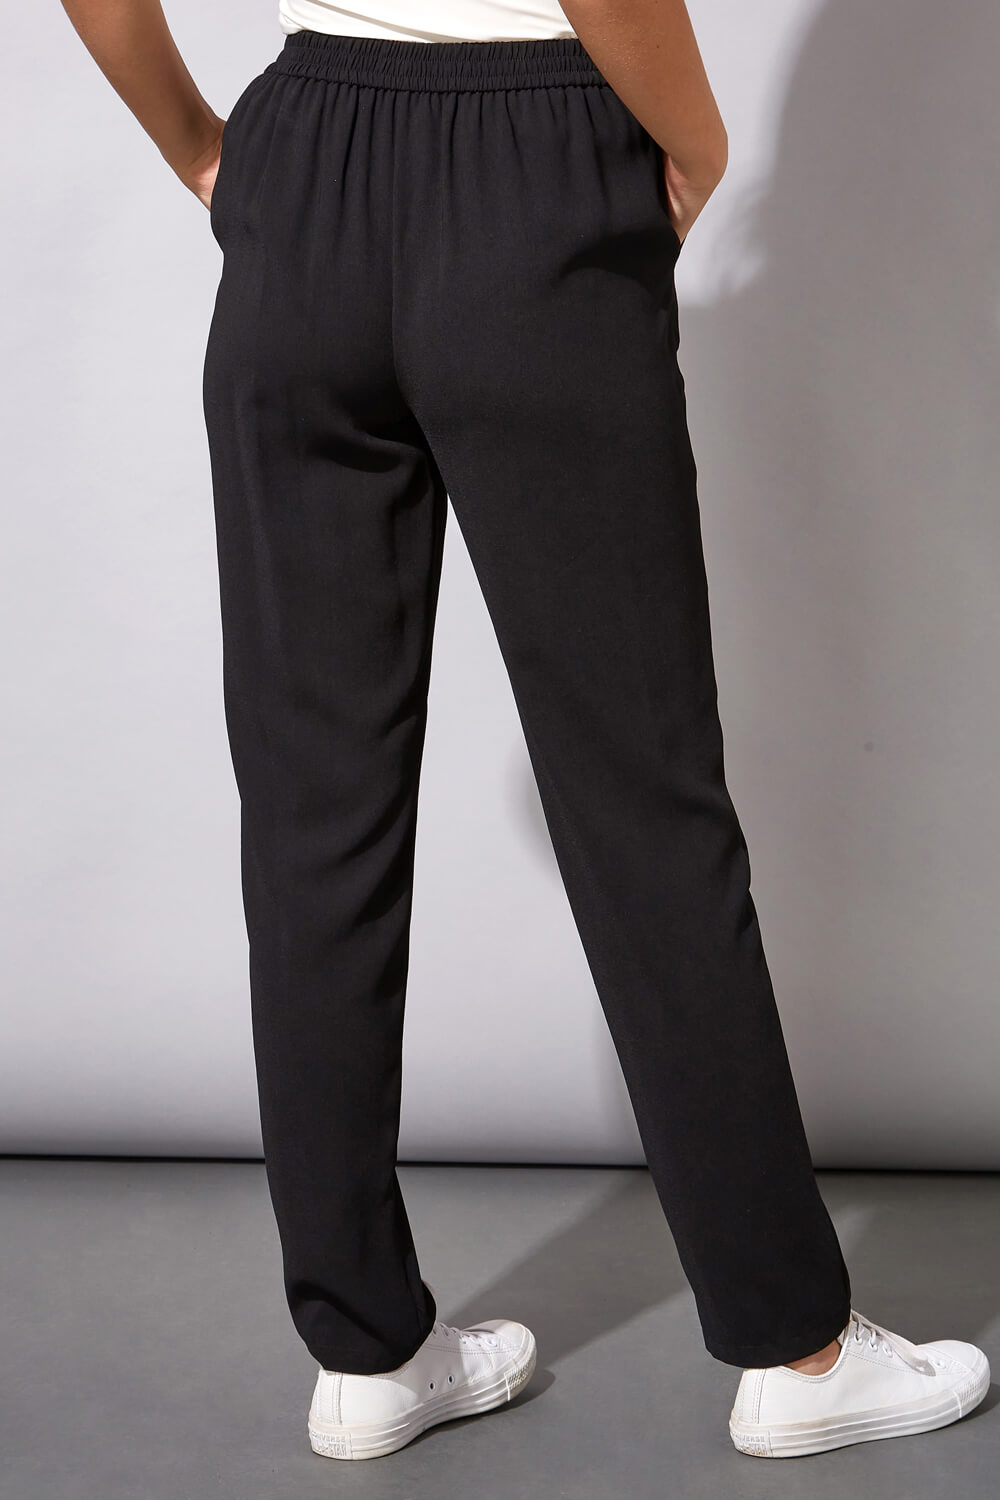 Black 25 Inch Tie Front Jogger, Image 2 of 4